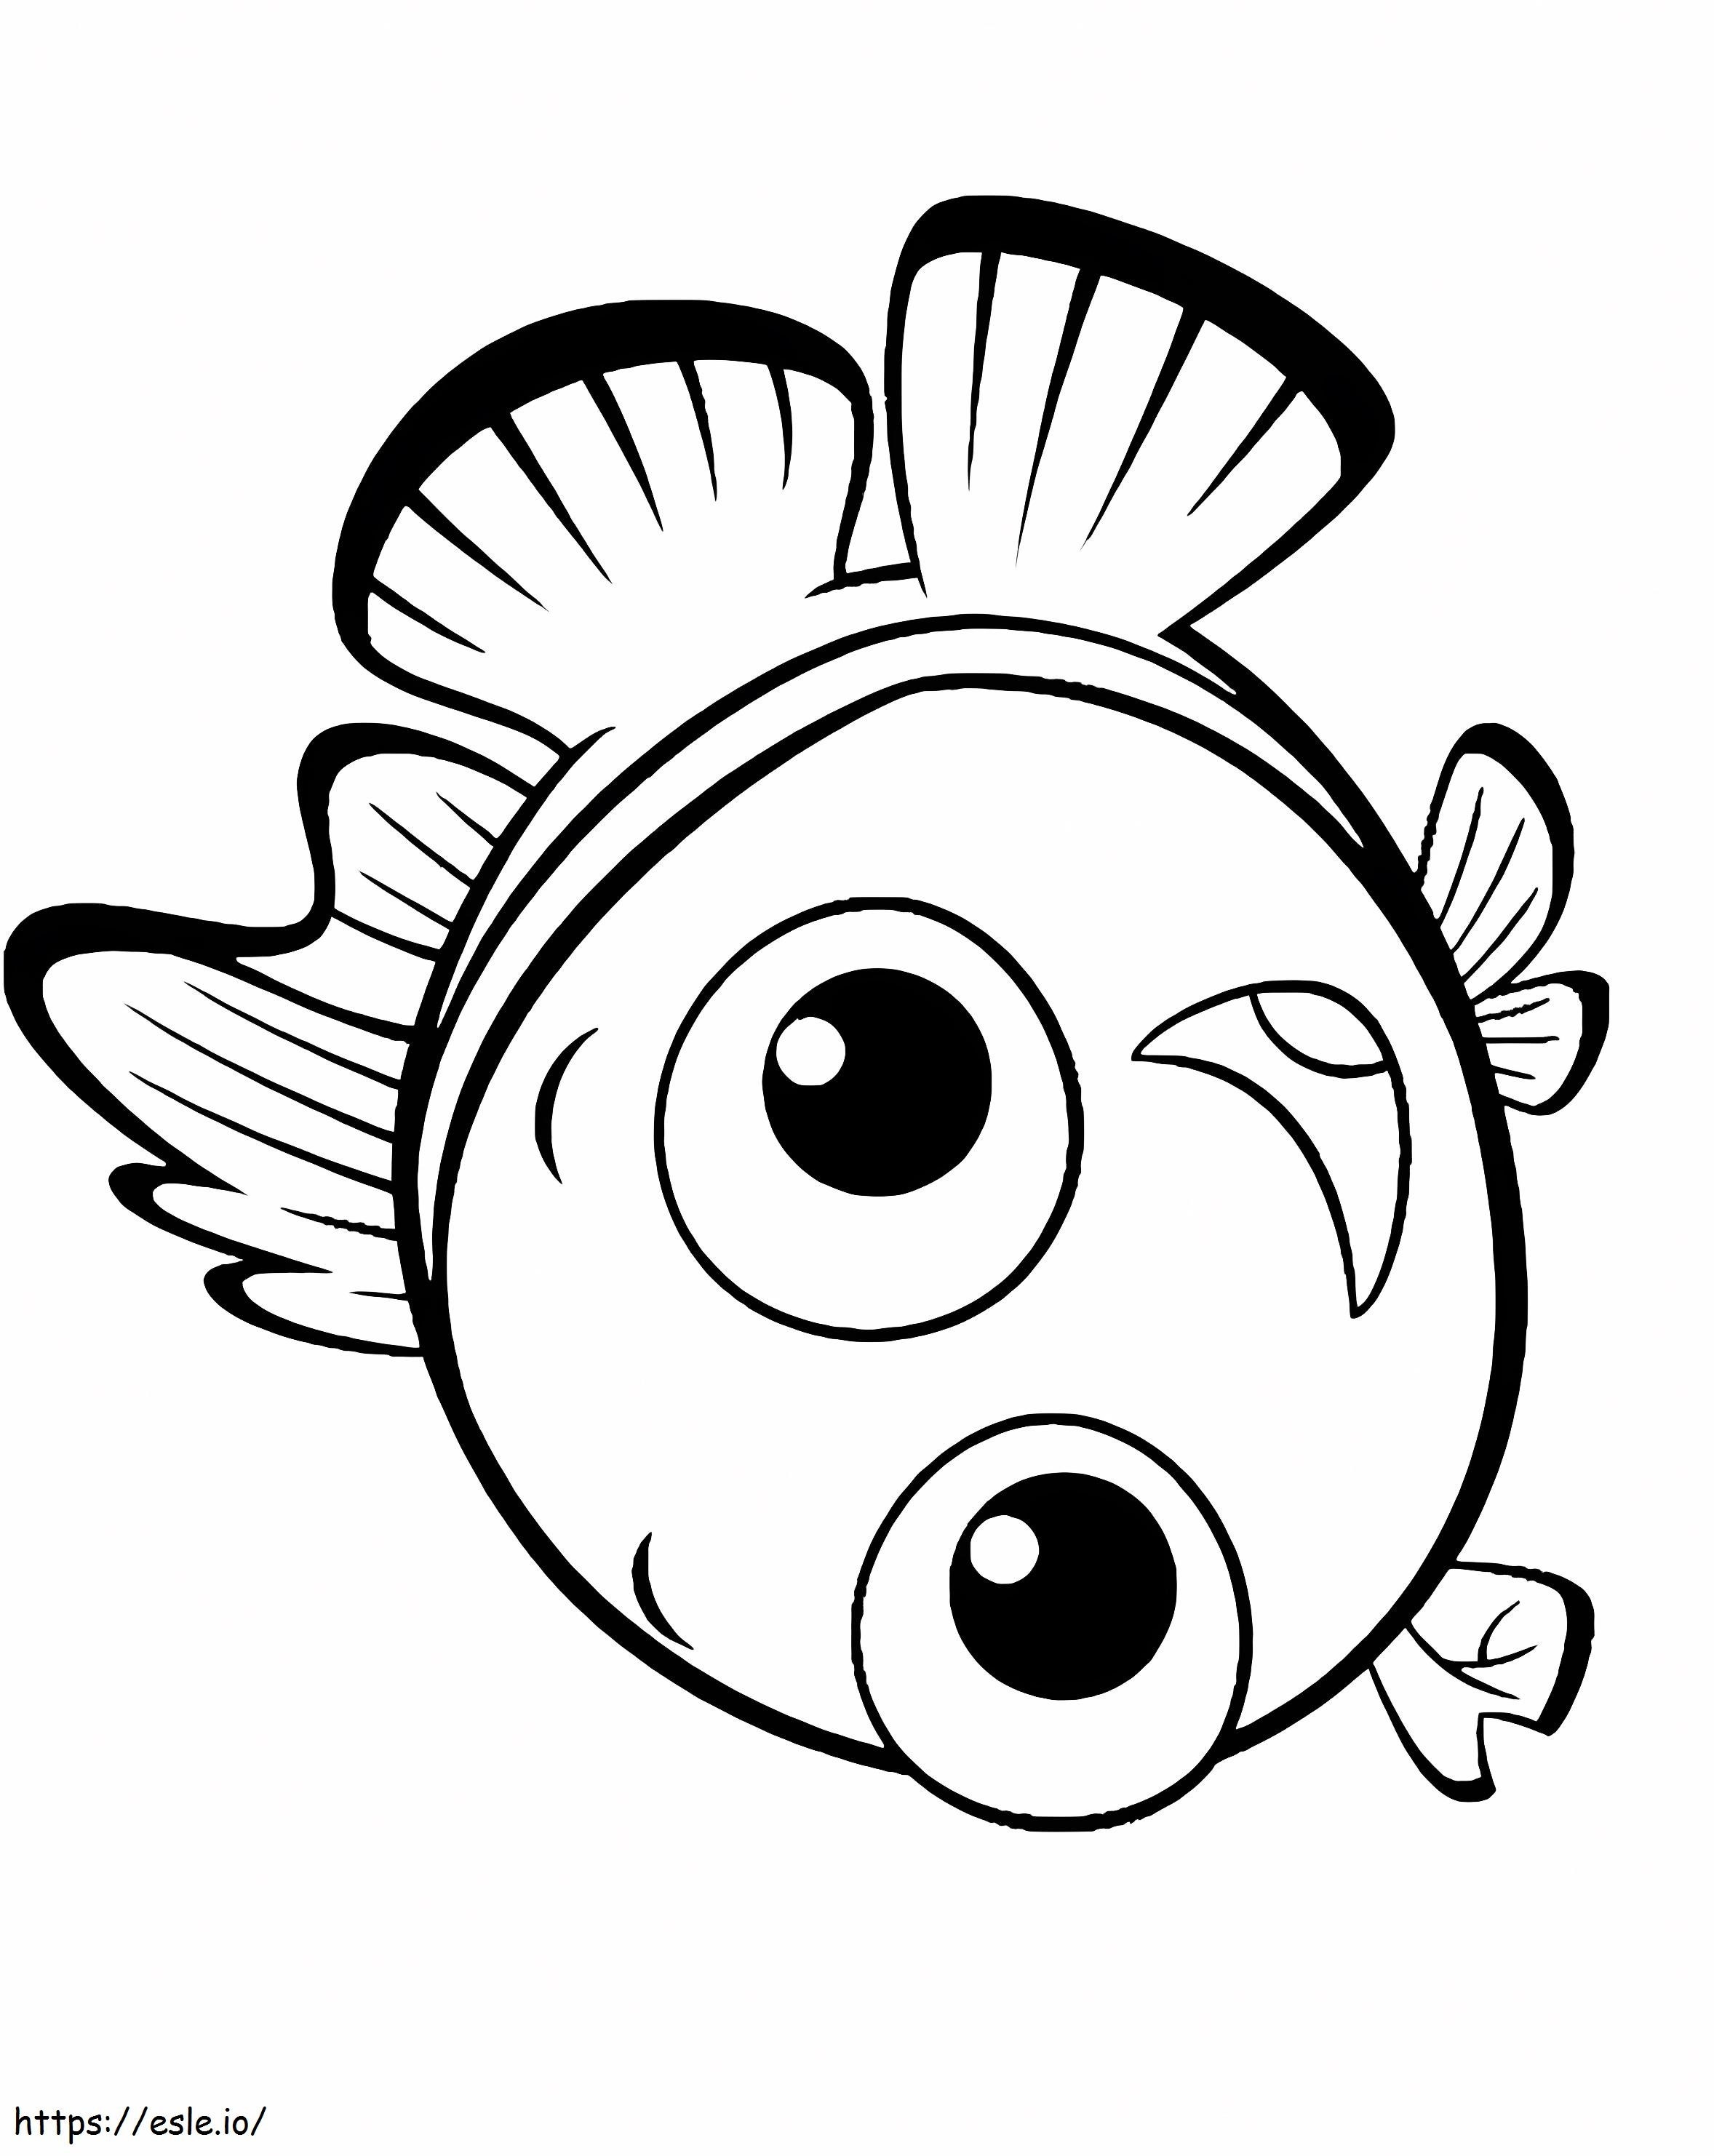 Con Cc3A1 He1Bb81 coloring page